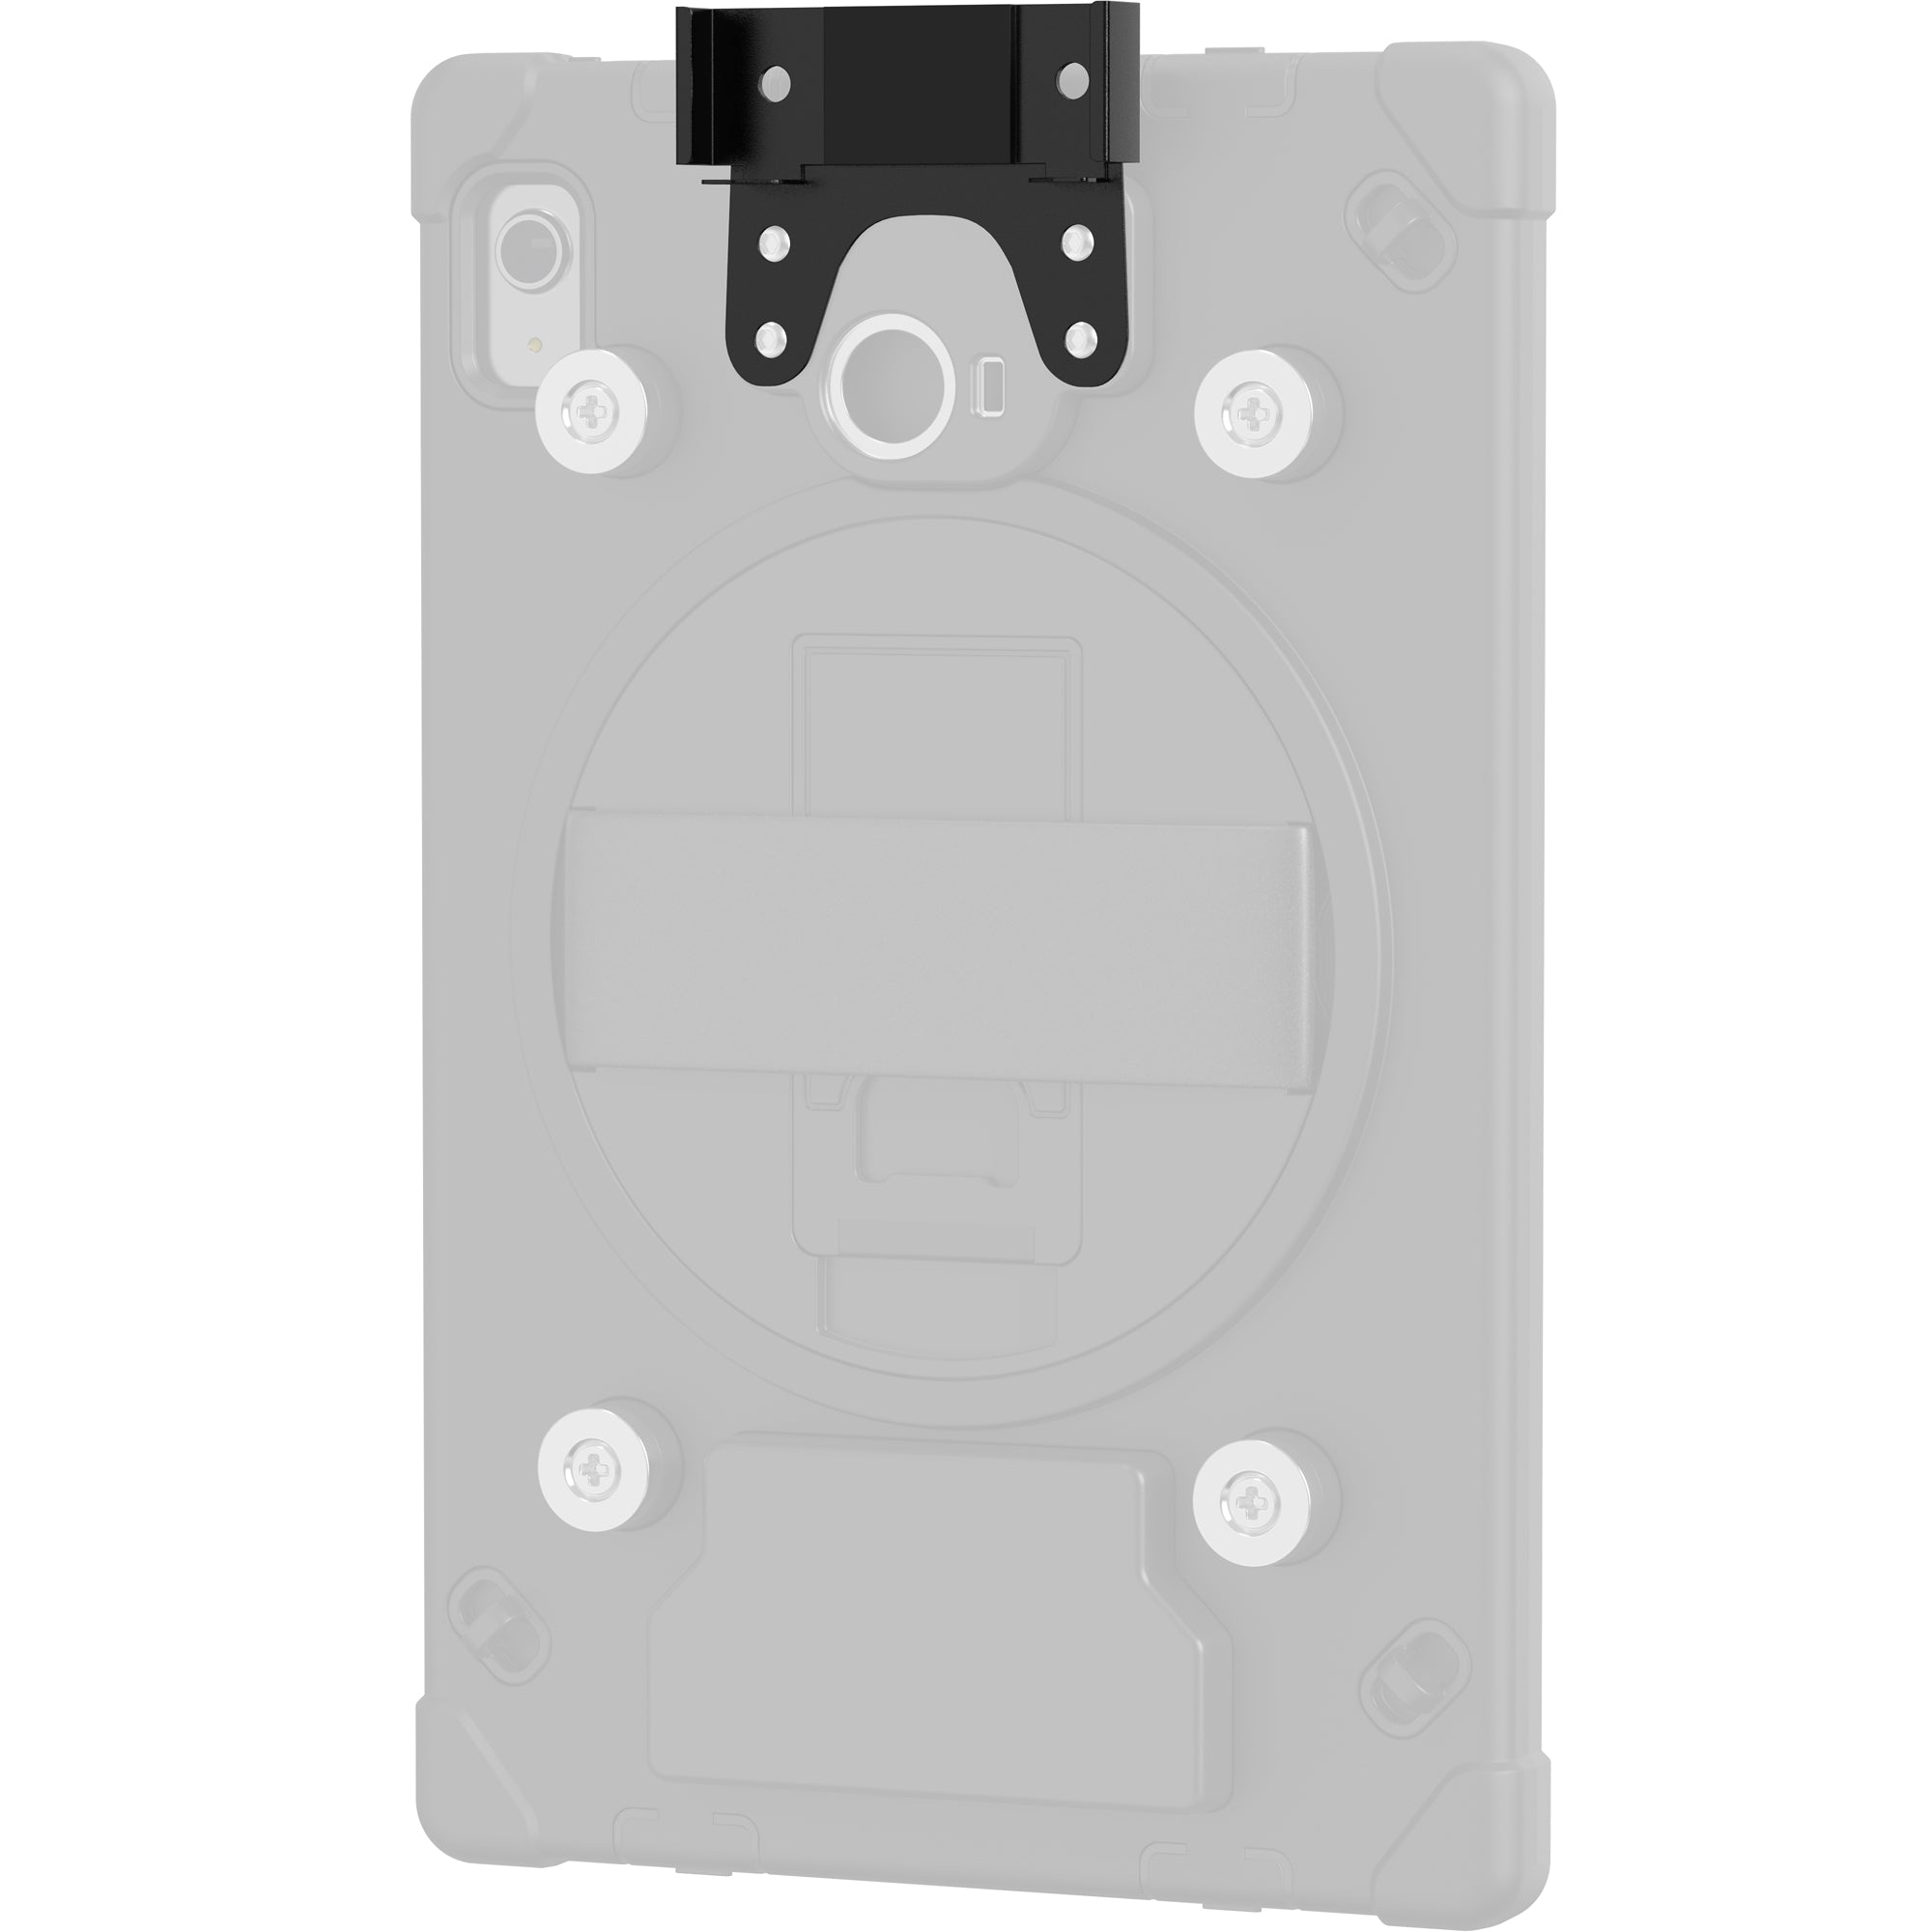 Add-On Moby 5500 Card Reader Bracket for CTA Tablet Cases